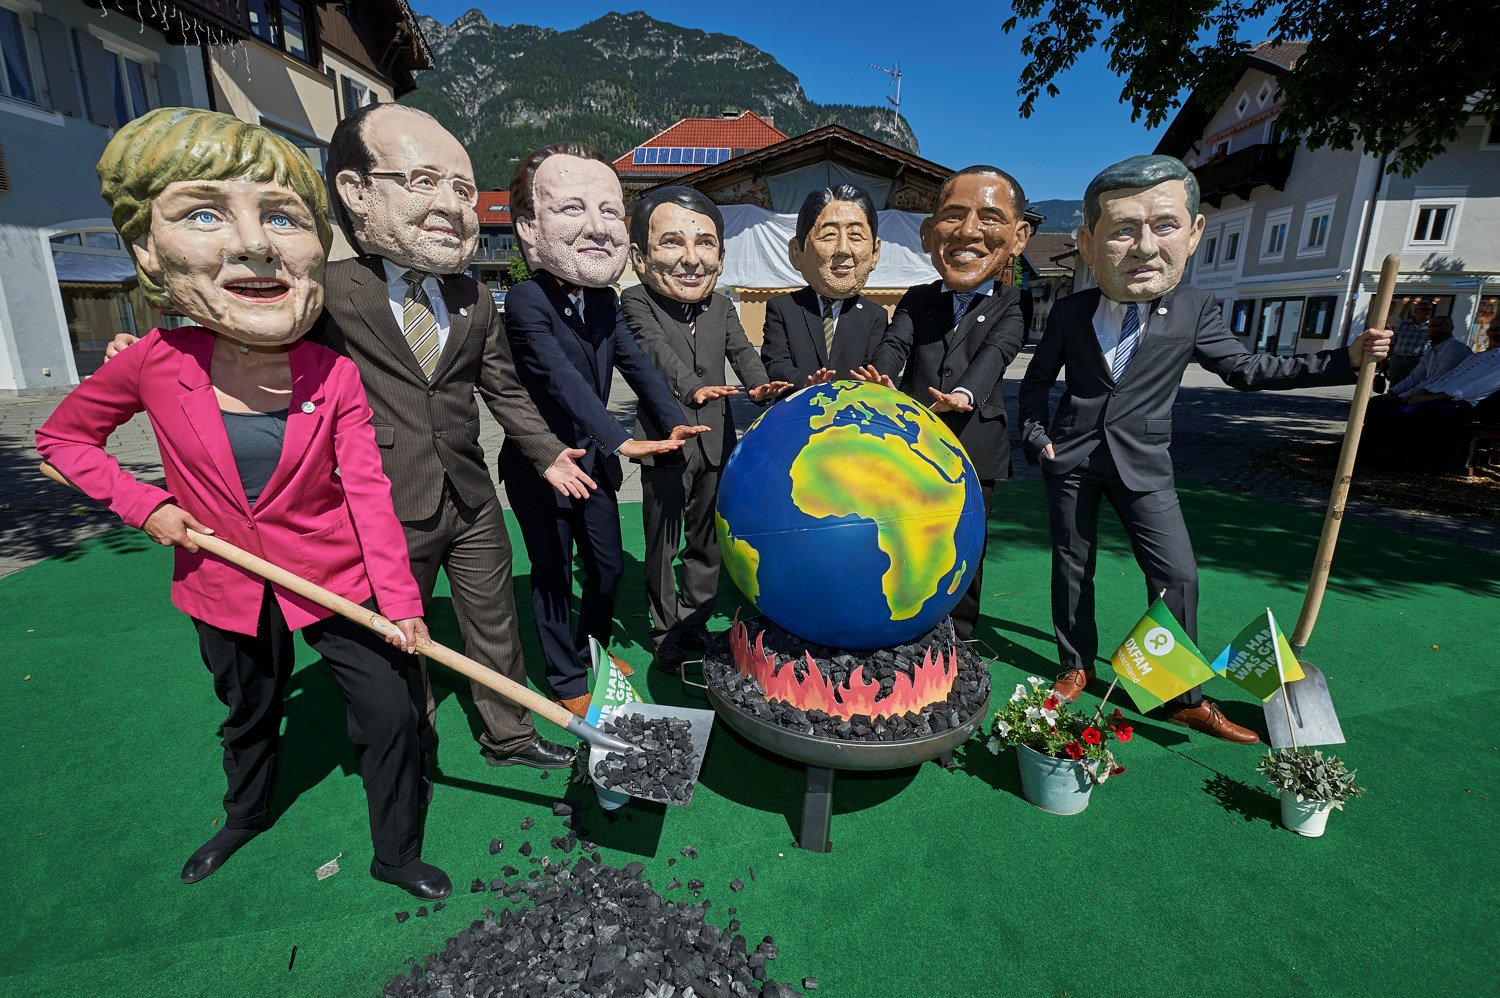 Oxfam is calling for G7 leaders, pictured barbecuing the planet at the G7 Summit, to kick their dirty coal habit.